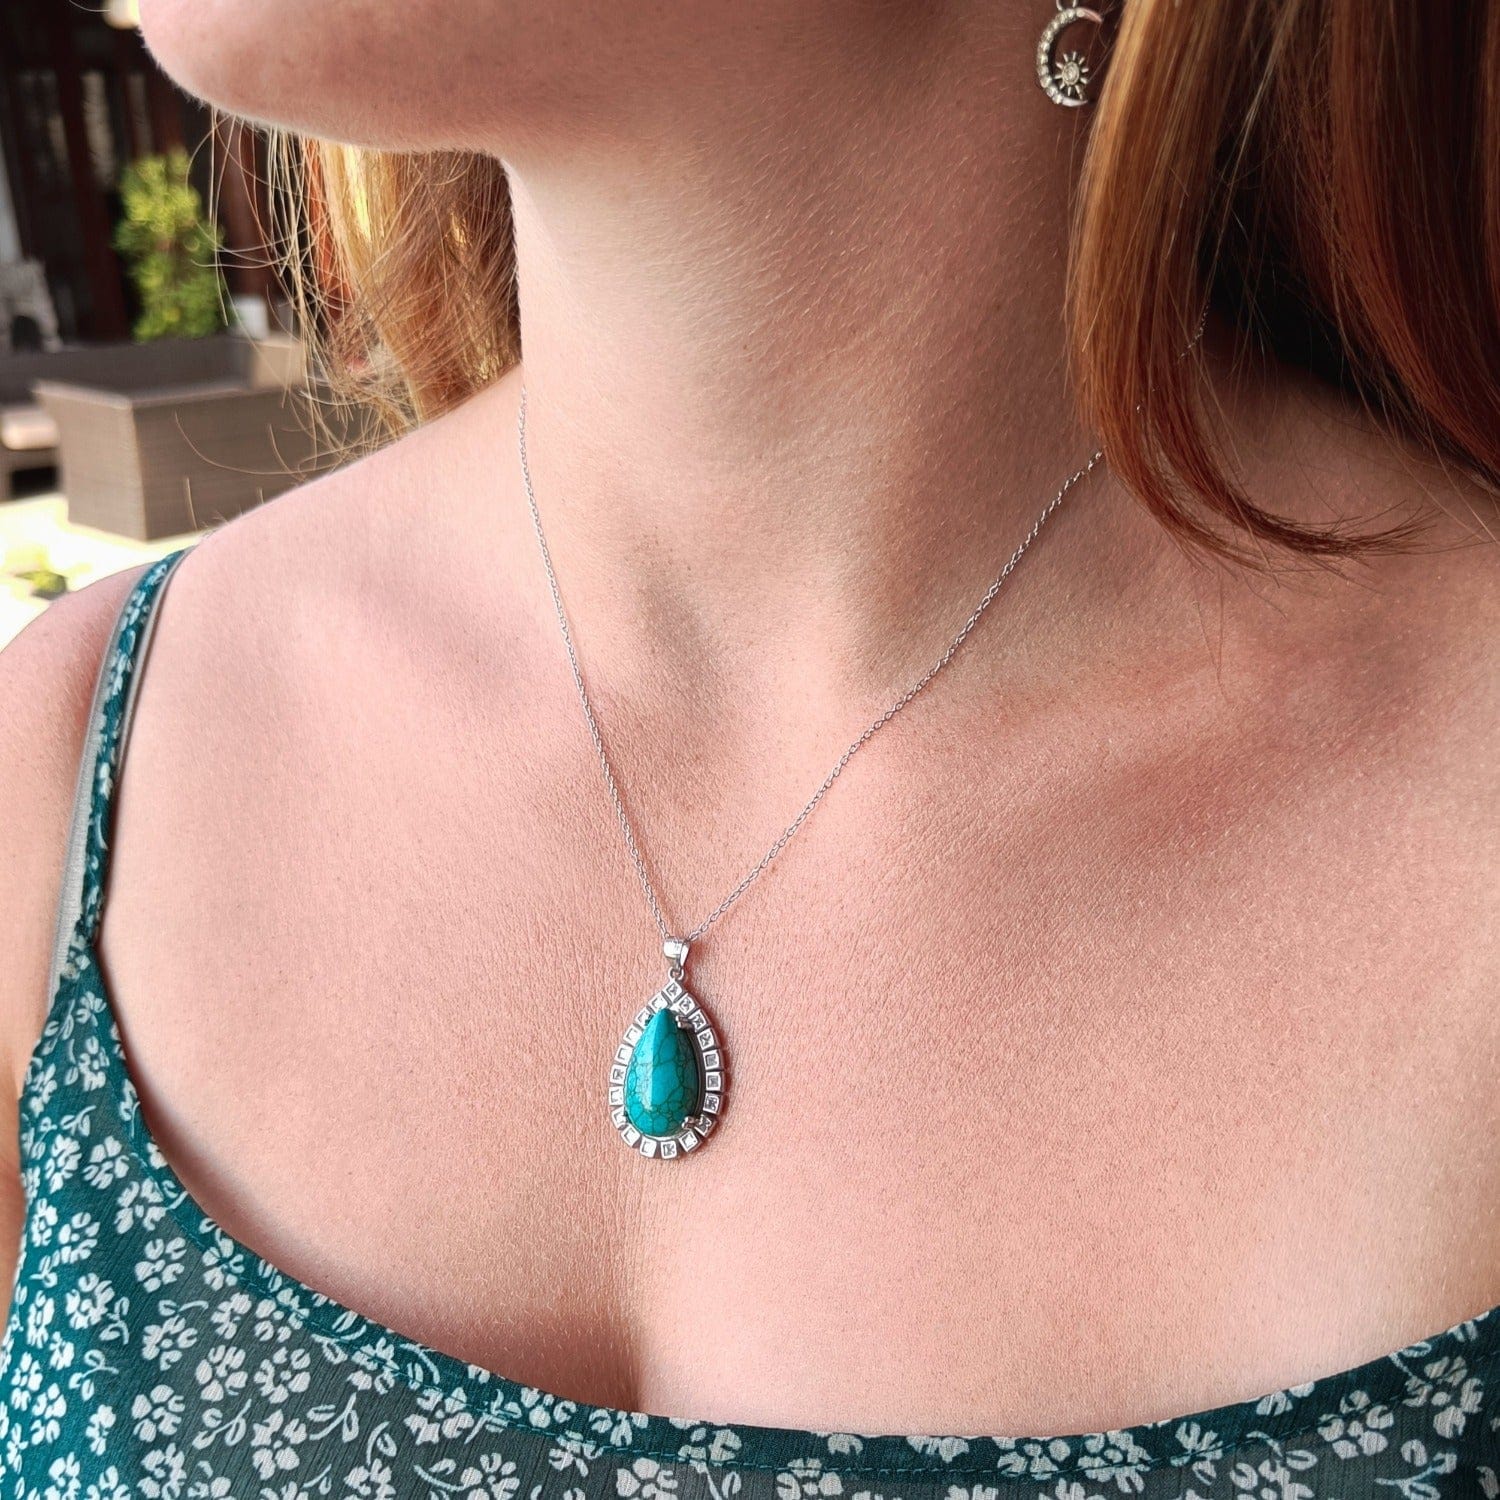 Azure Oceanic Pendant Necklace with a stunning turquoise stone set in sterling silver on a model zoomed out user generated content review